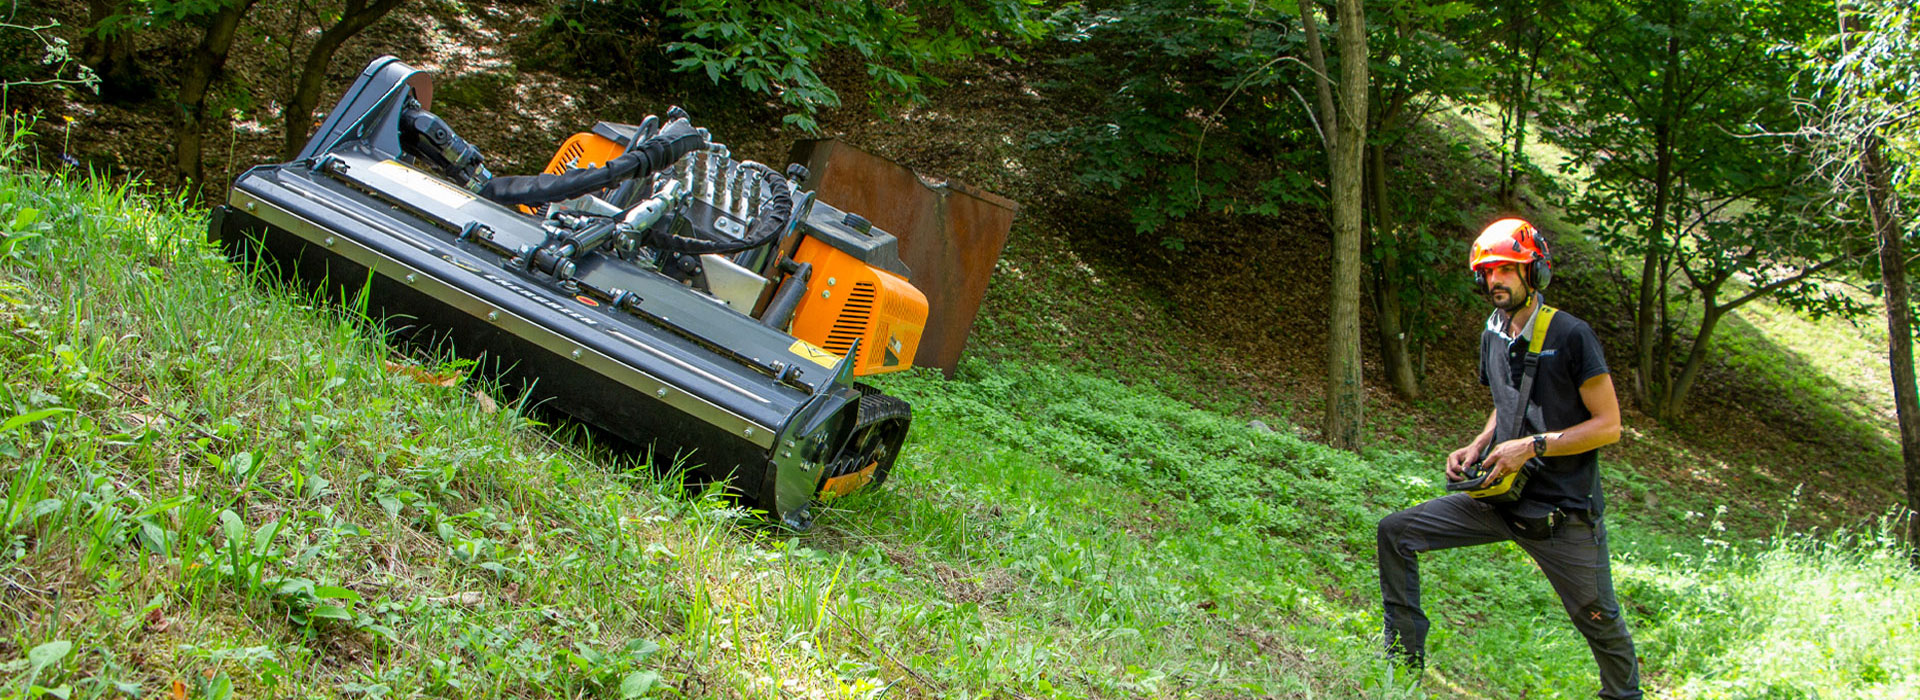 Energreen RoboMINI Remote Controlled Mower on Slope